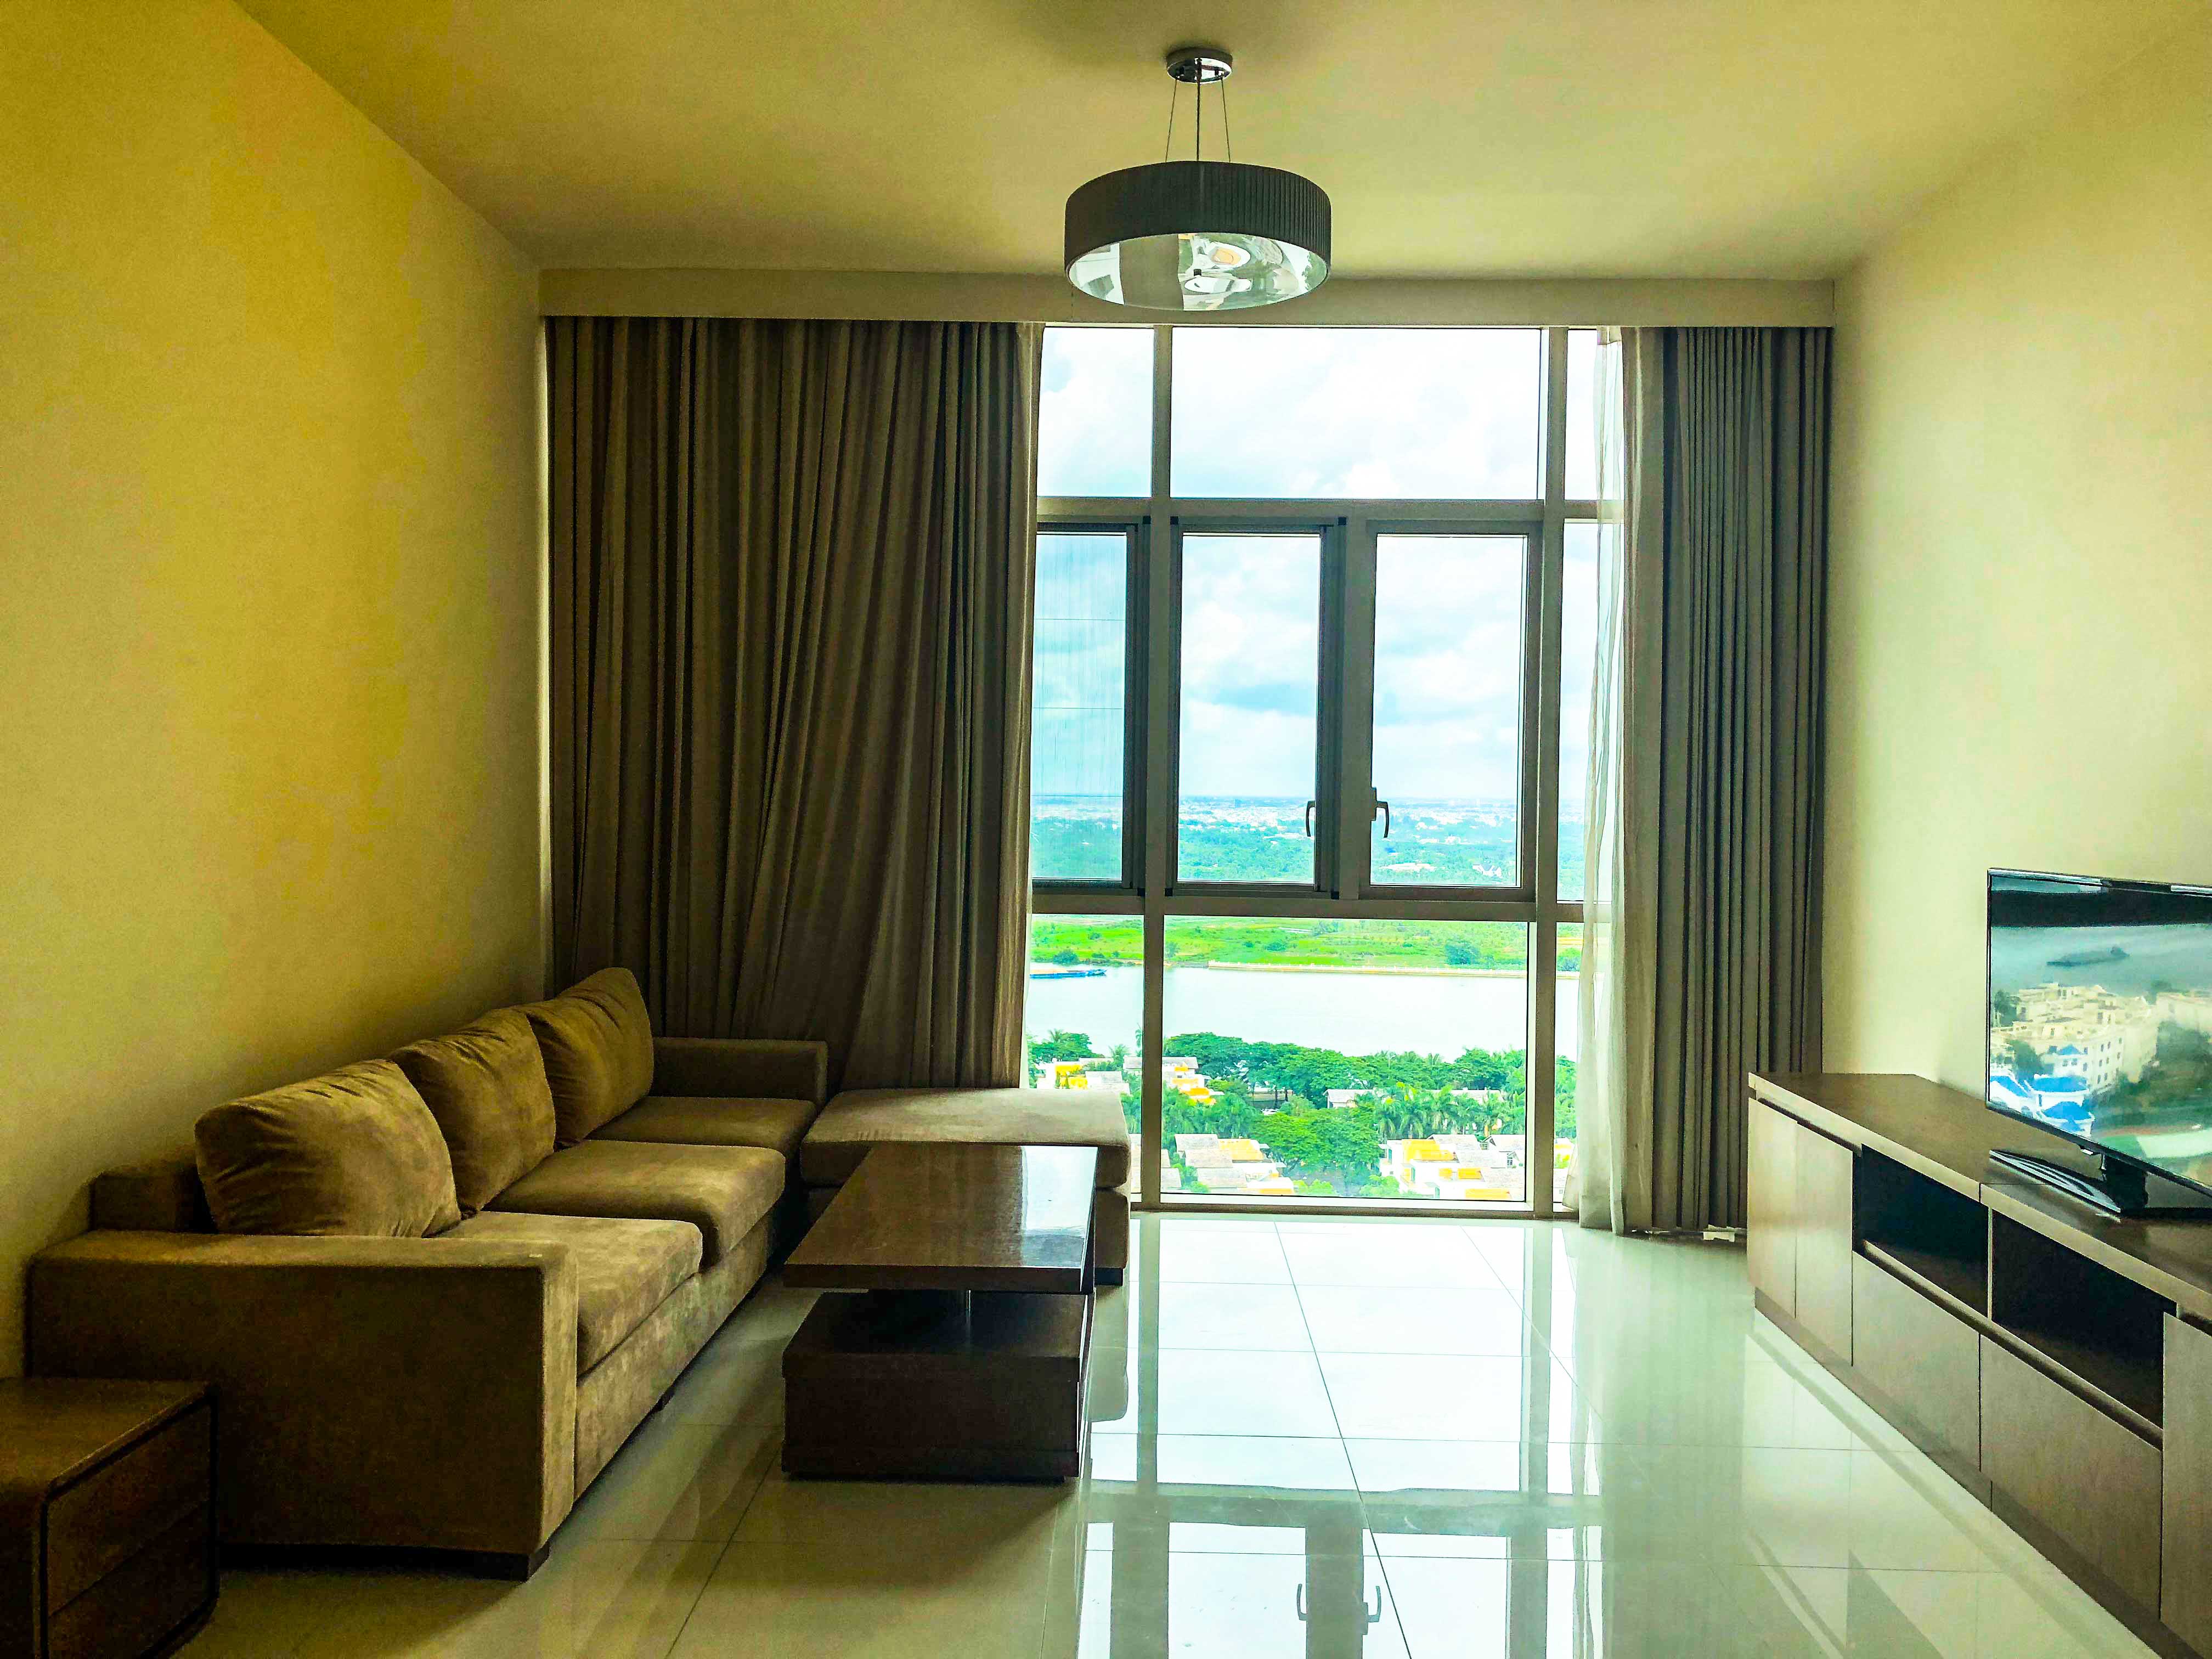 The Vista apartment for rent in An Phu Ward, District 2, Ho Chi Minh City - 3 bedrooms